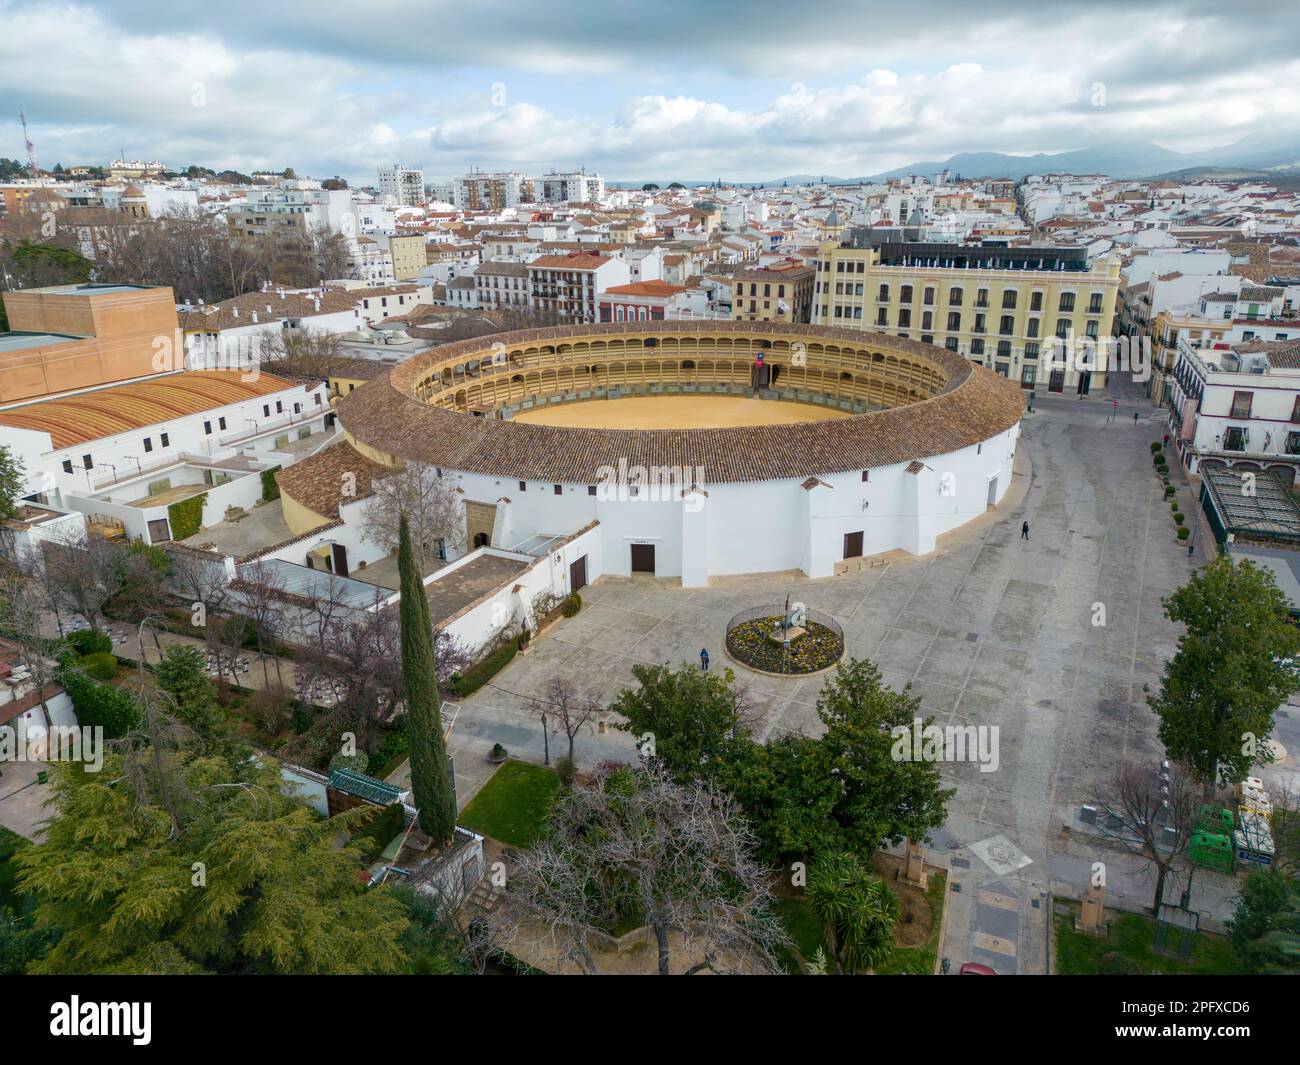 The bullring of the Royal Cavalry of Ronda, Spain Stock Photo